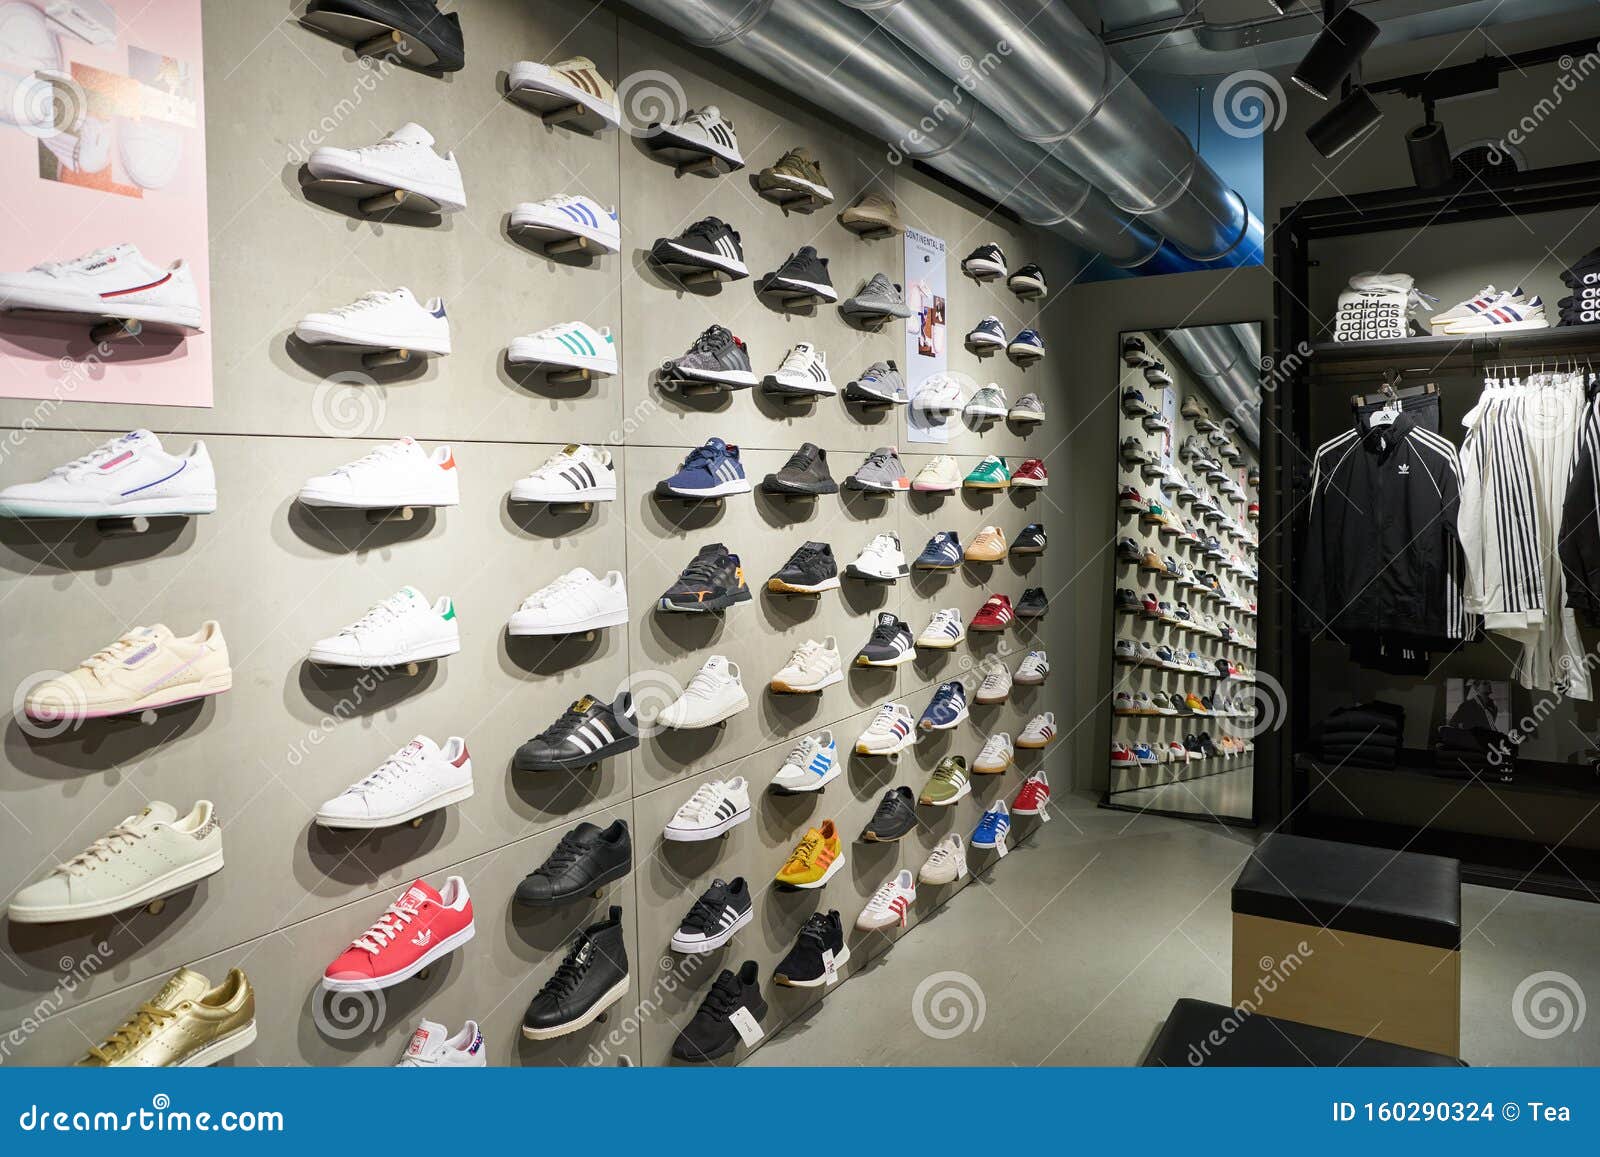 Adidas store editorial stock image. Image of athletic - 160290324